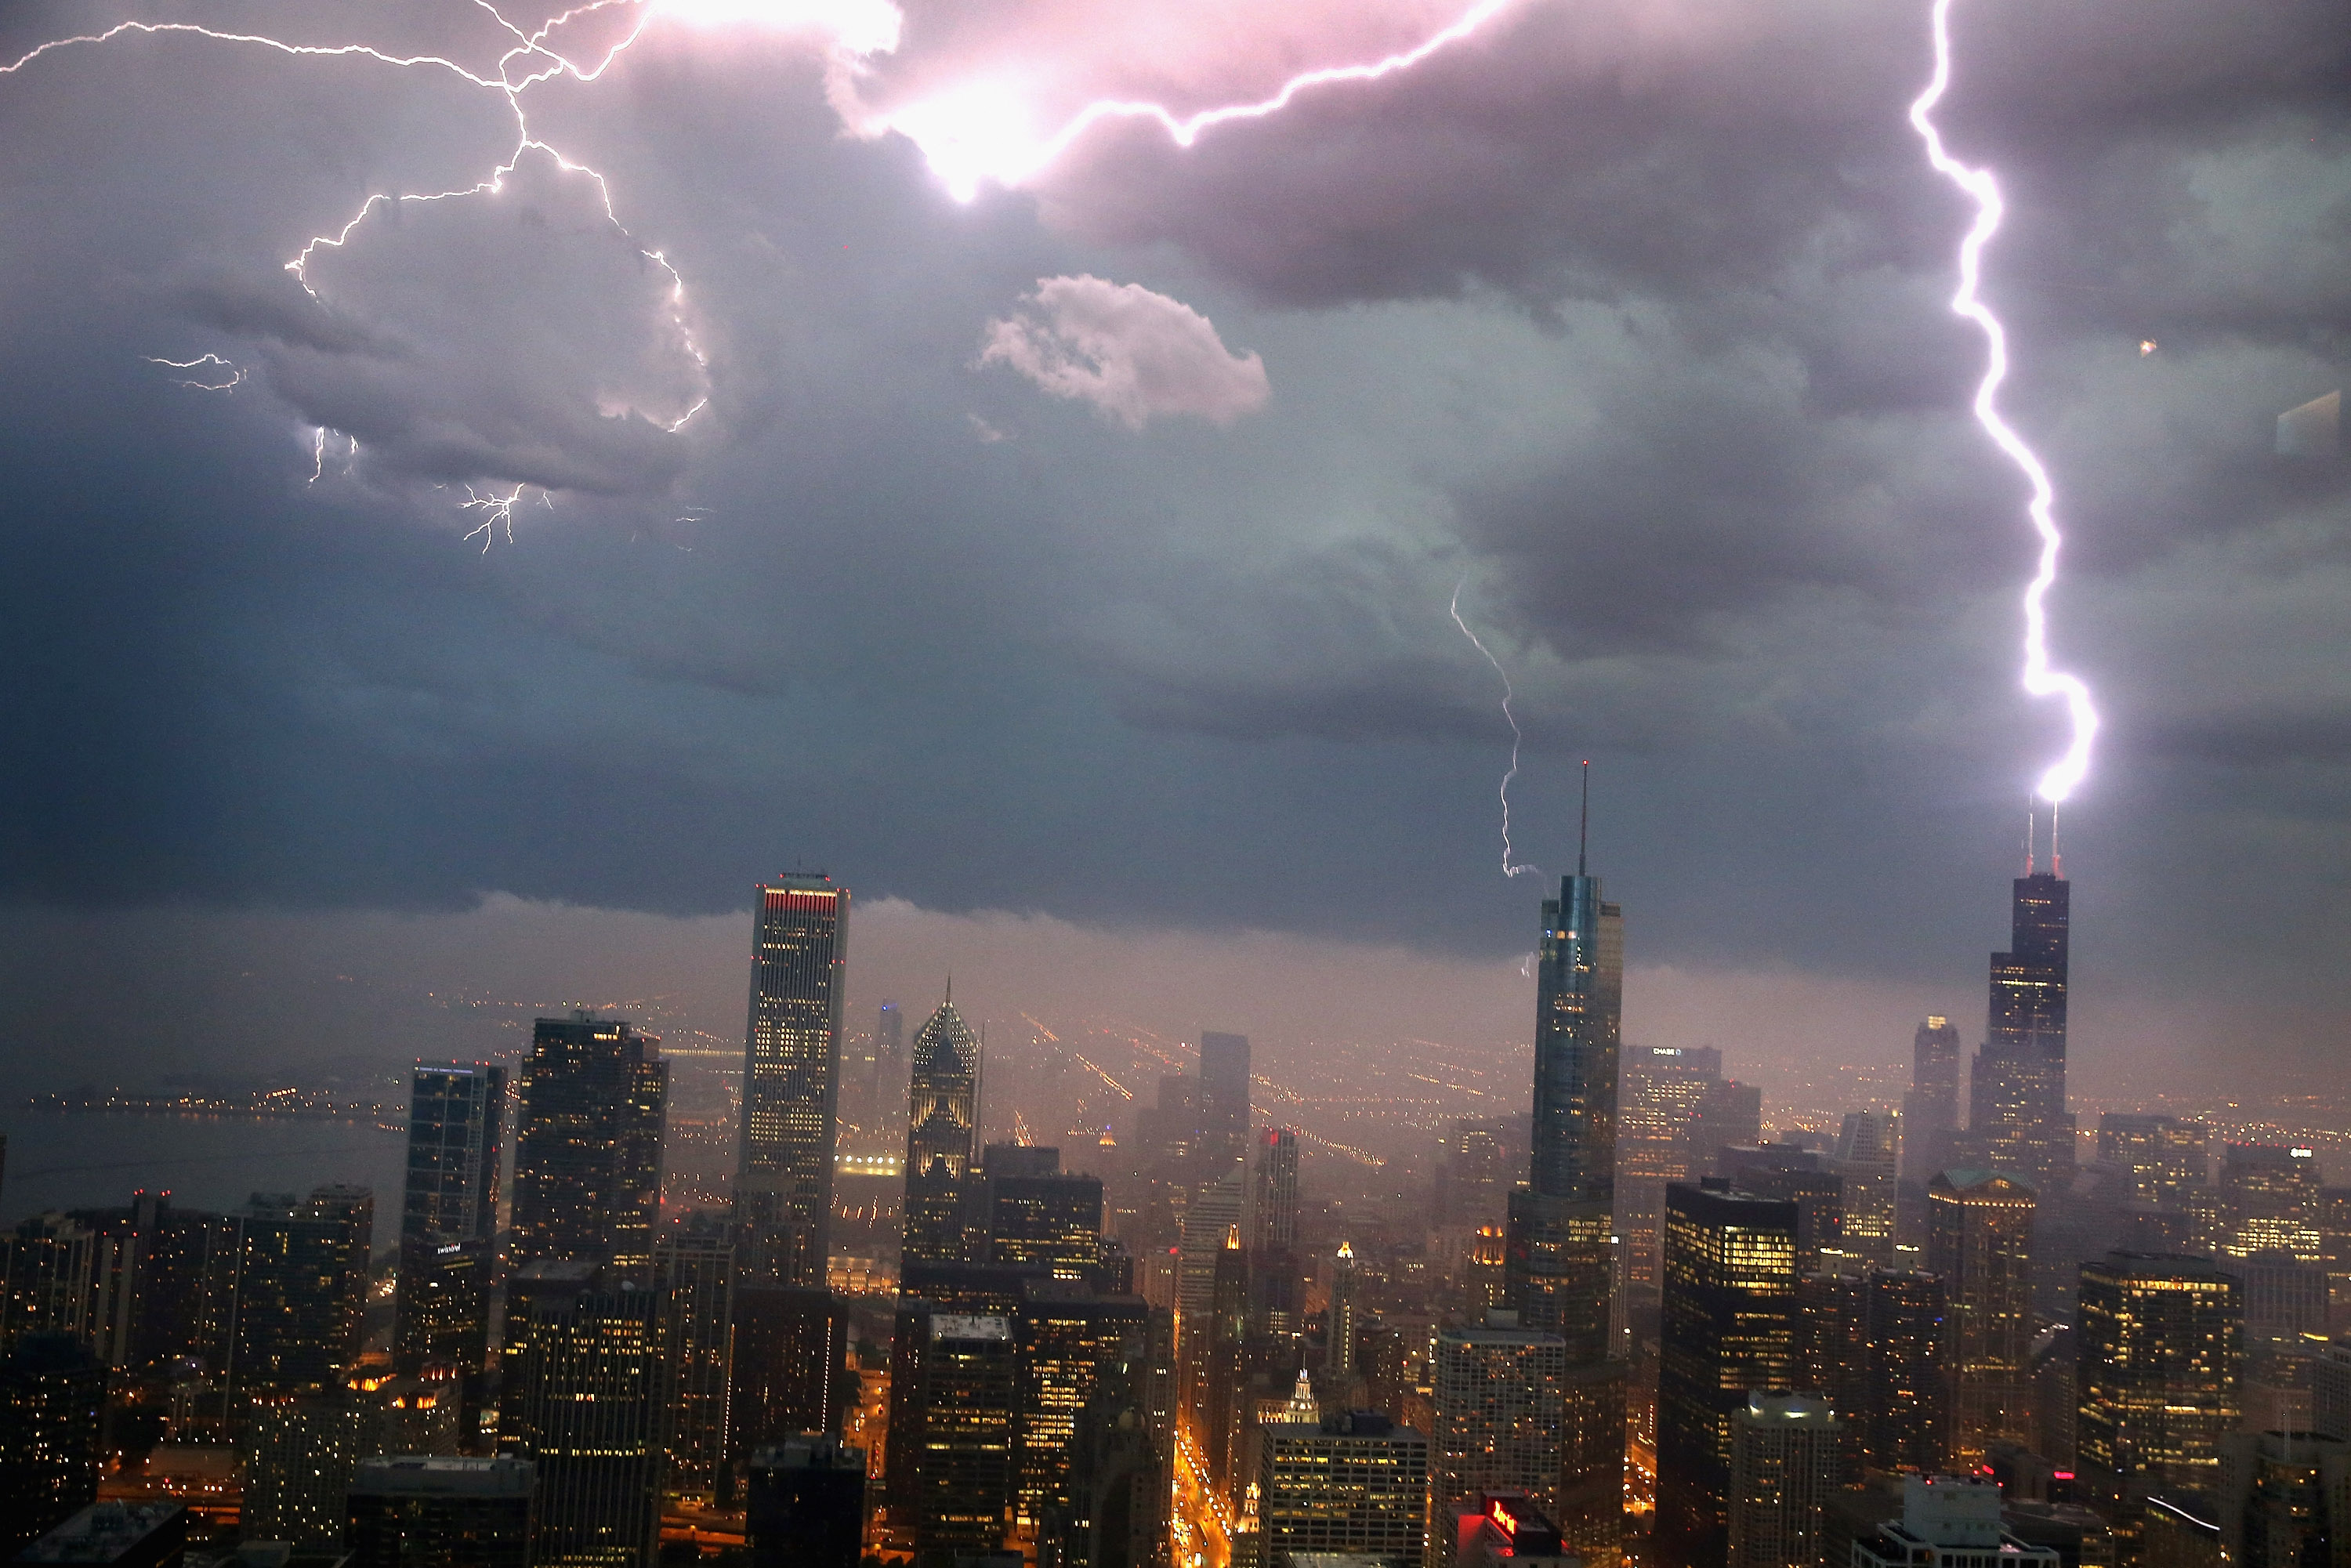 CHICAGO, IL - JUNE 12:  Lightning strikes the Willis Tower (formerly Sears Tower) in downtown on June 12, 2013 in Chicago, Illinois. A massive storm system with heavy rain, high winds, hail and possible tornadoes is expected to move into Illinois and much of the central part of the Midwest today.  (Photo by Scott Olson/Getty Images)